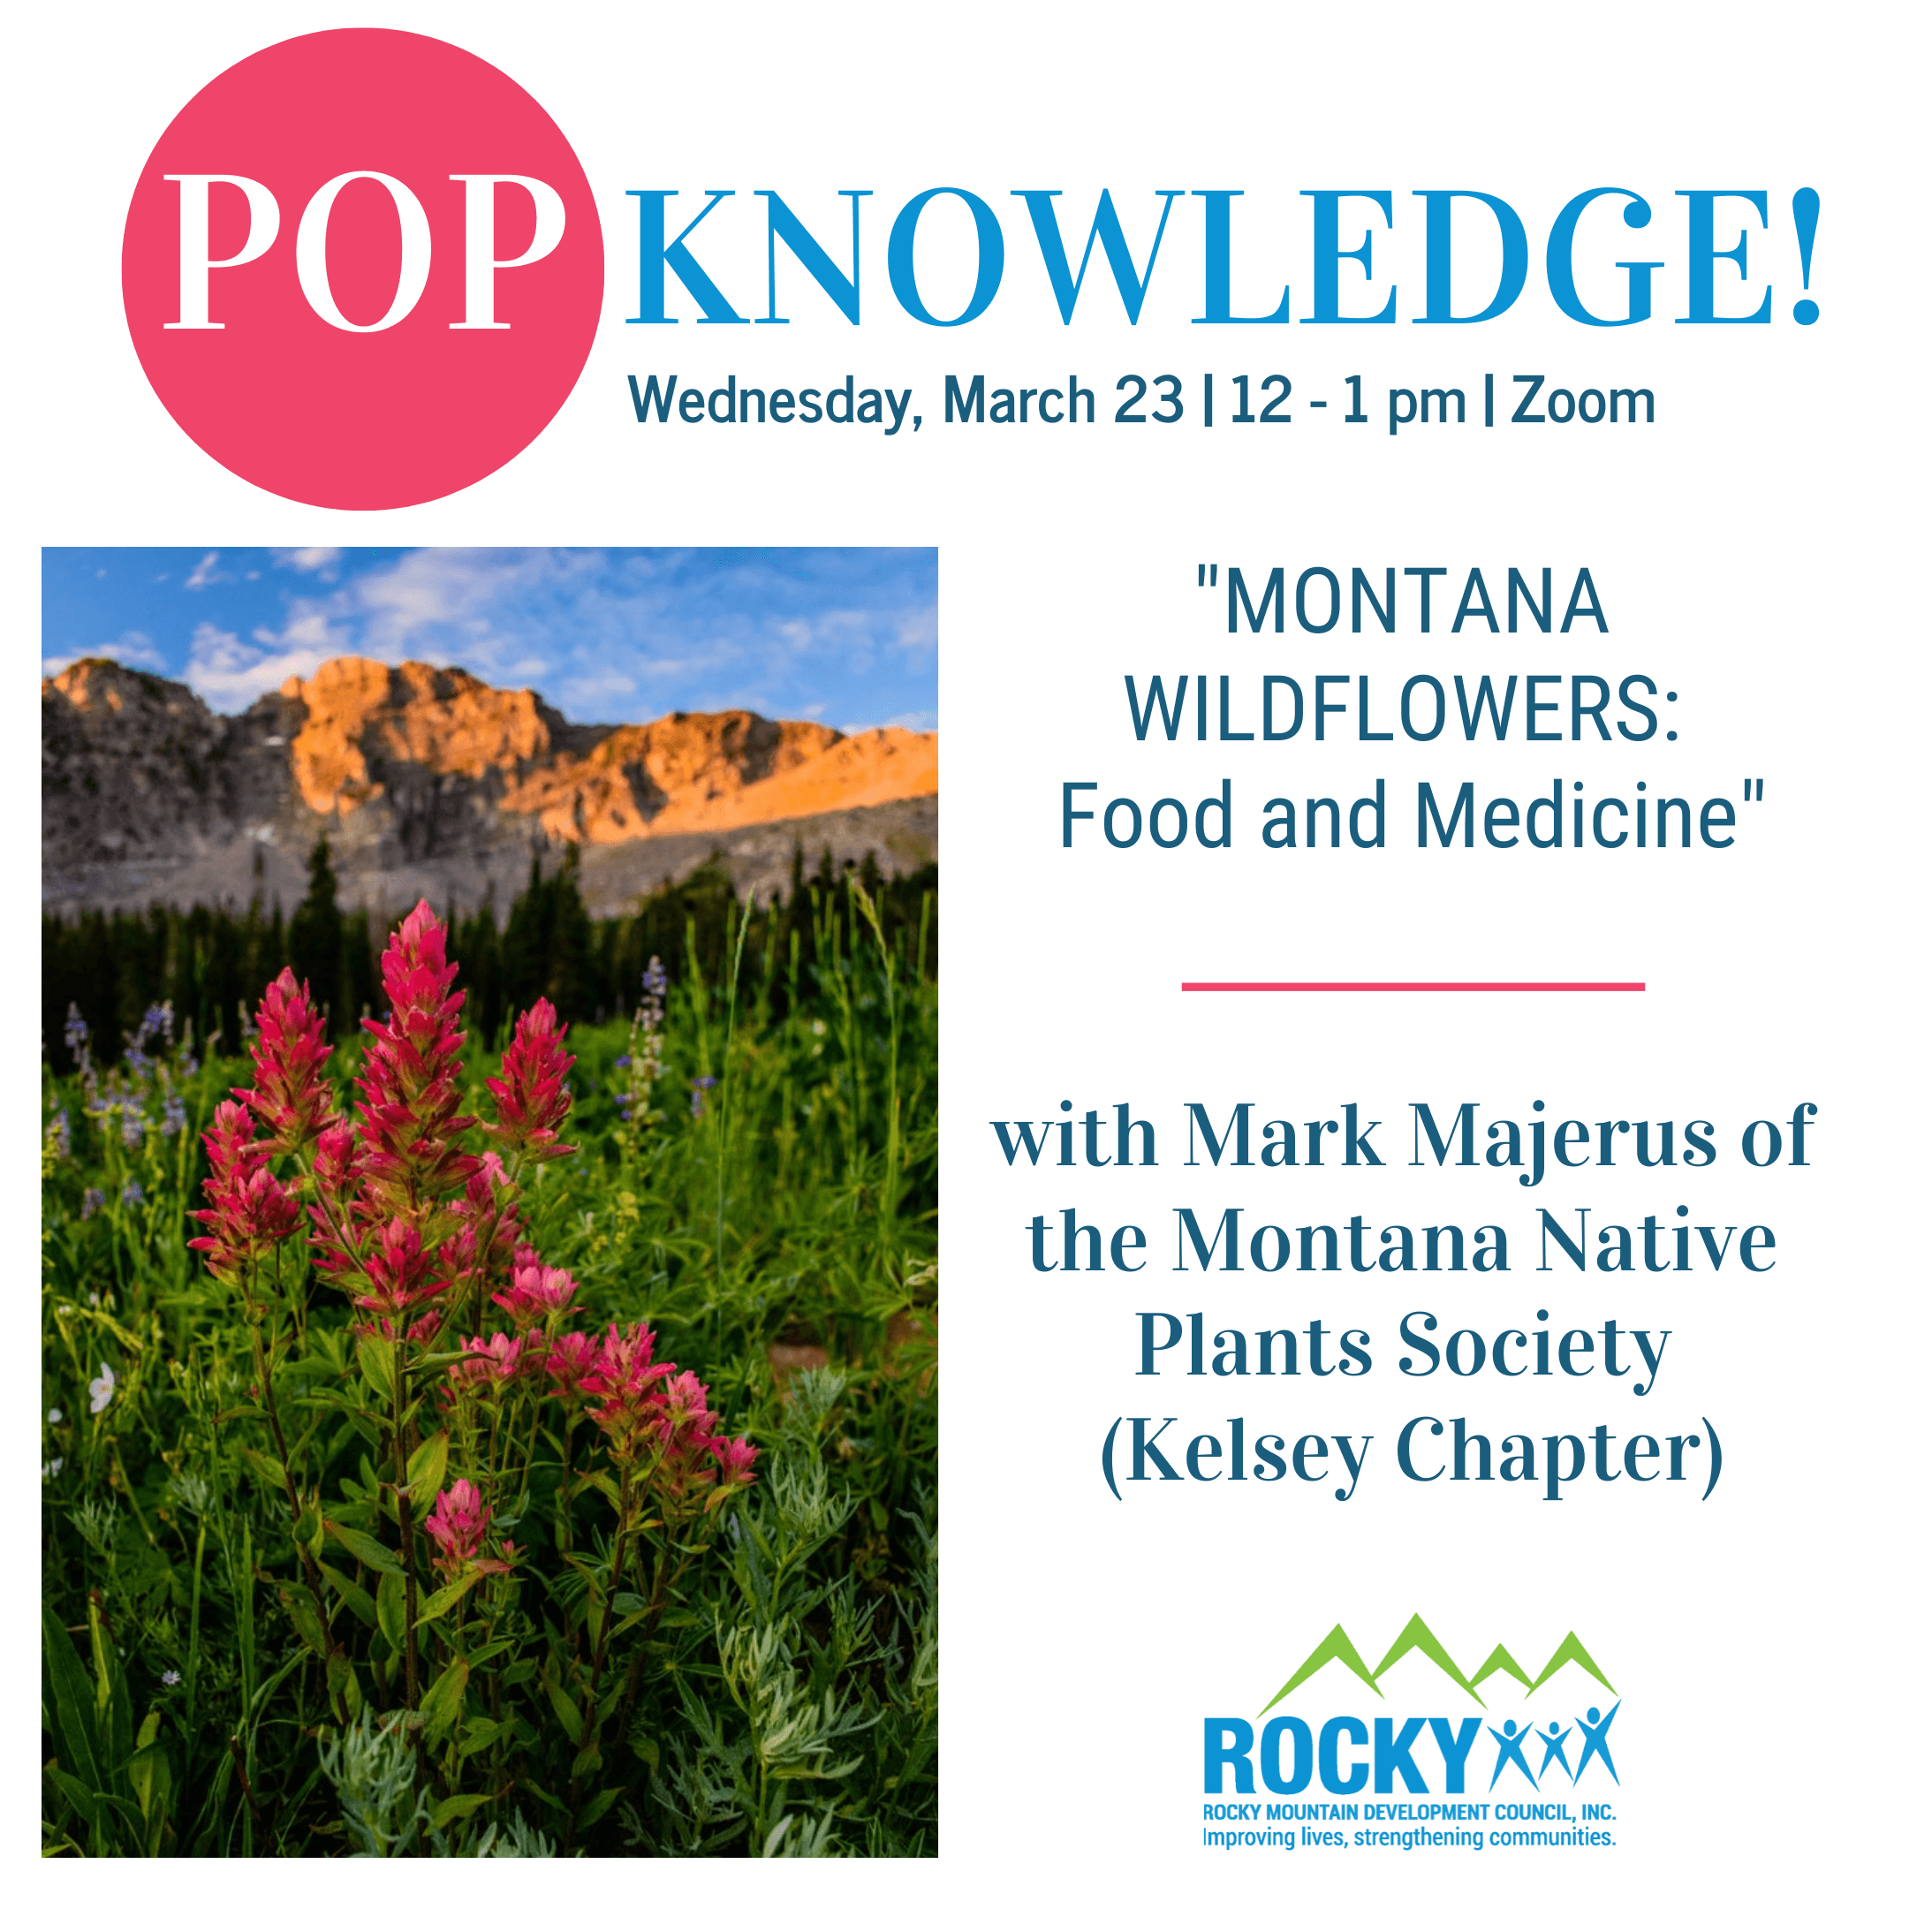 Join us for a PopKnowledge! session with with Mark Majerus of the Montana Native Plants Society (Kelsey Chapter).